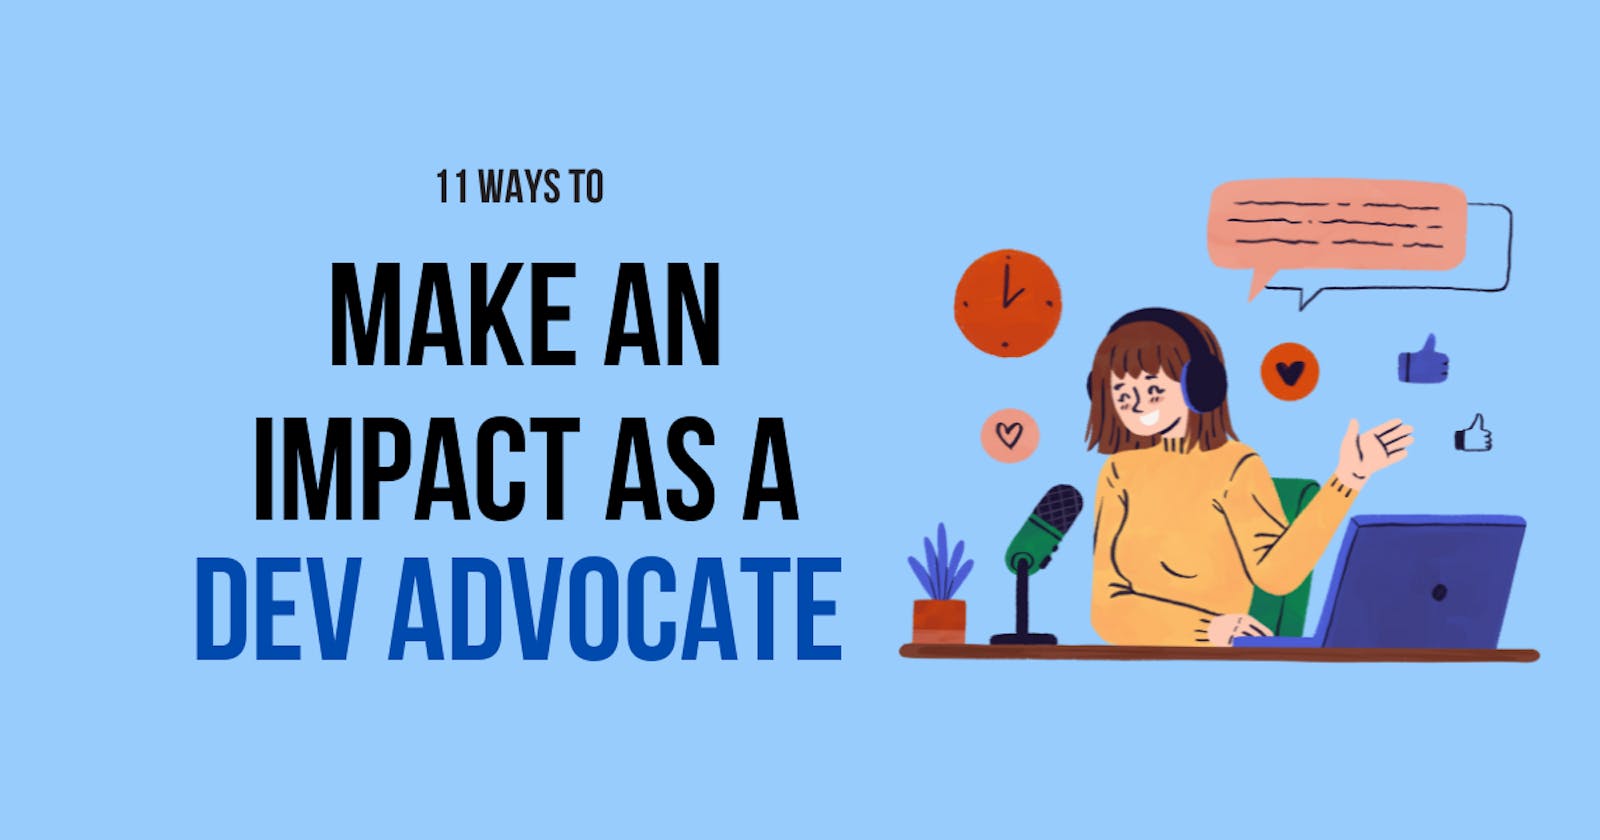 How to make an impact as a developer advocate